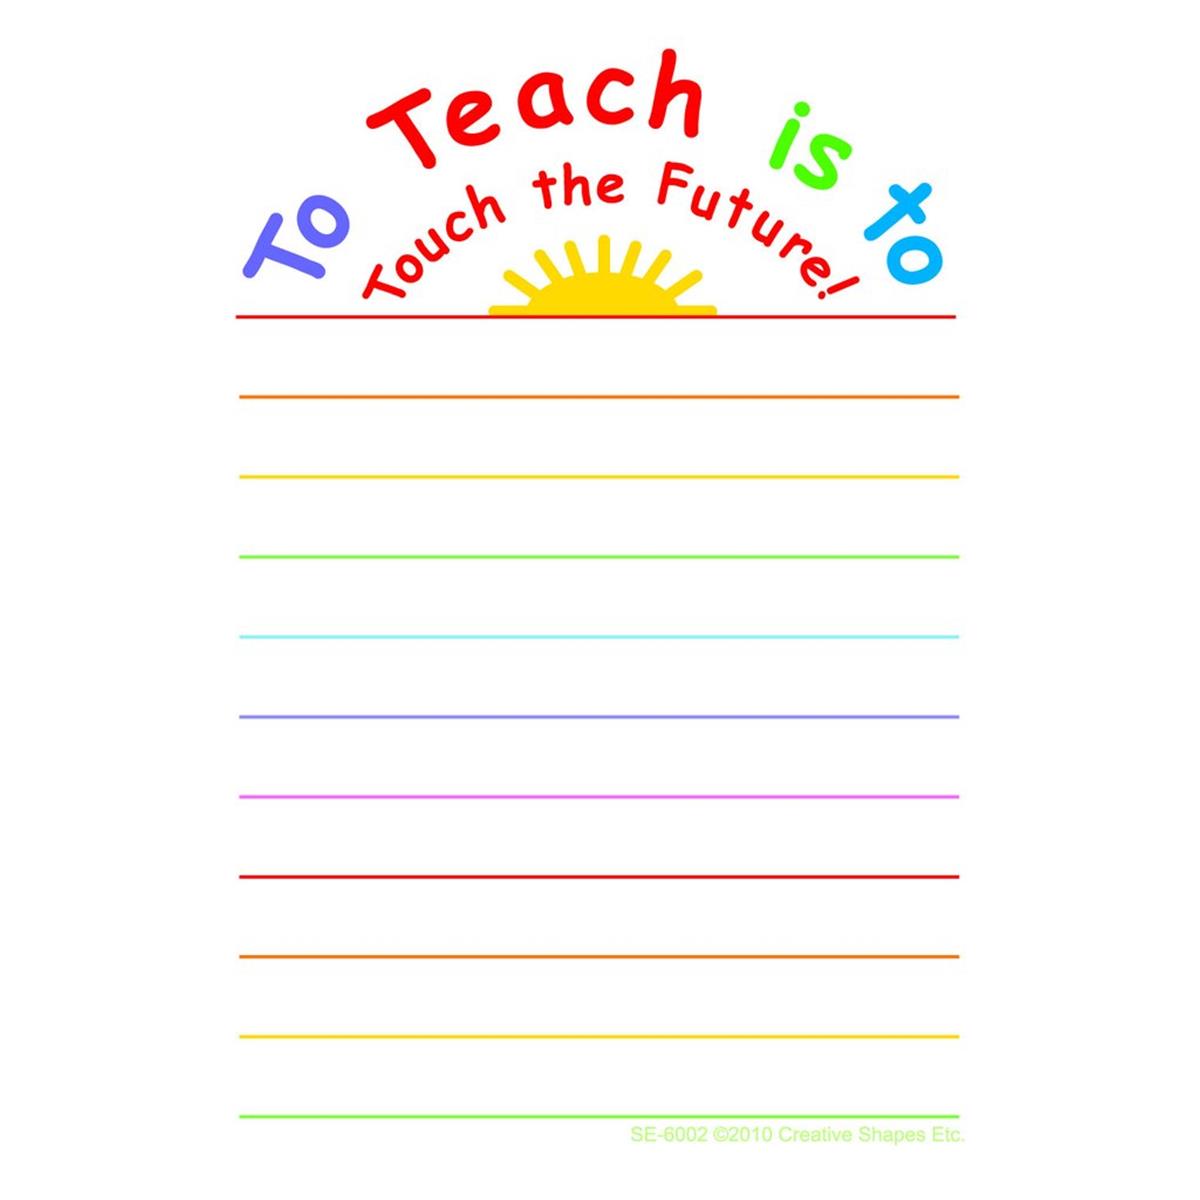 Se-6002 3.5 X 5 In. Notes & Quotes, Touch The Future - 35 Sheets Per Pack